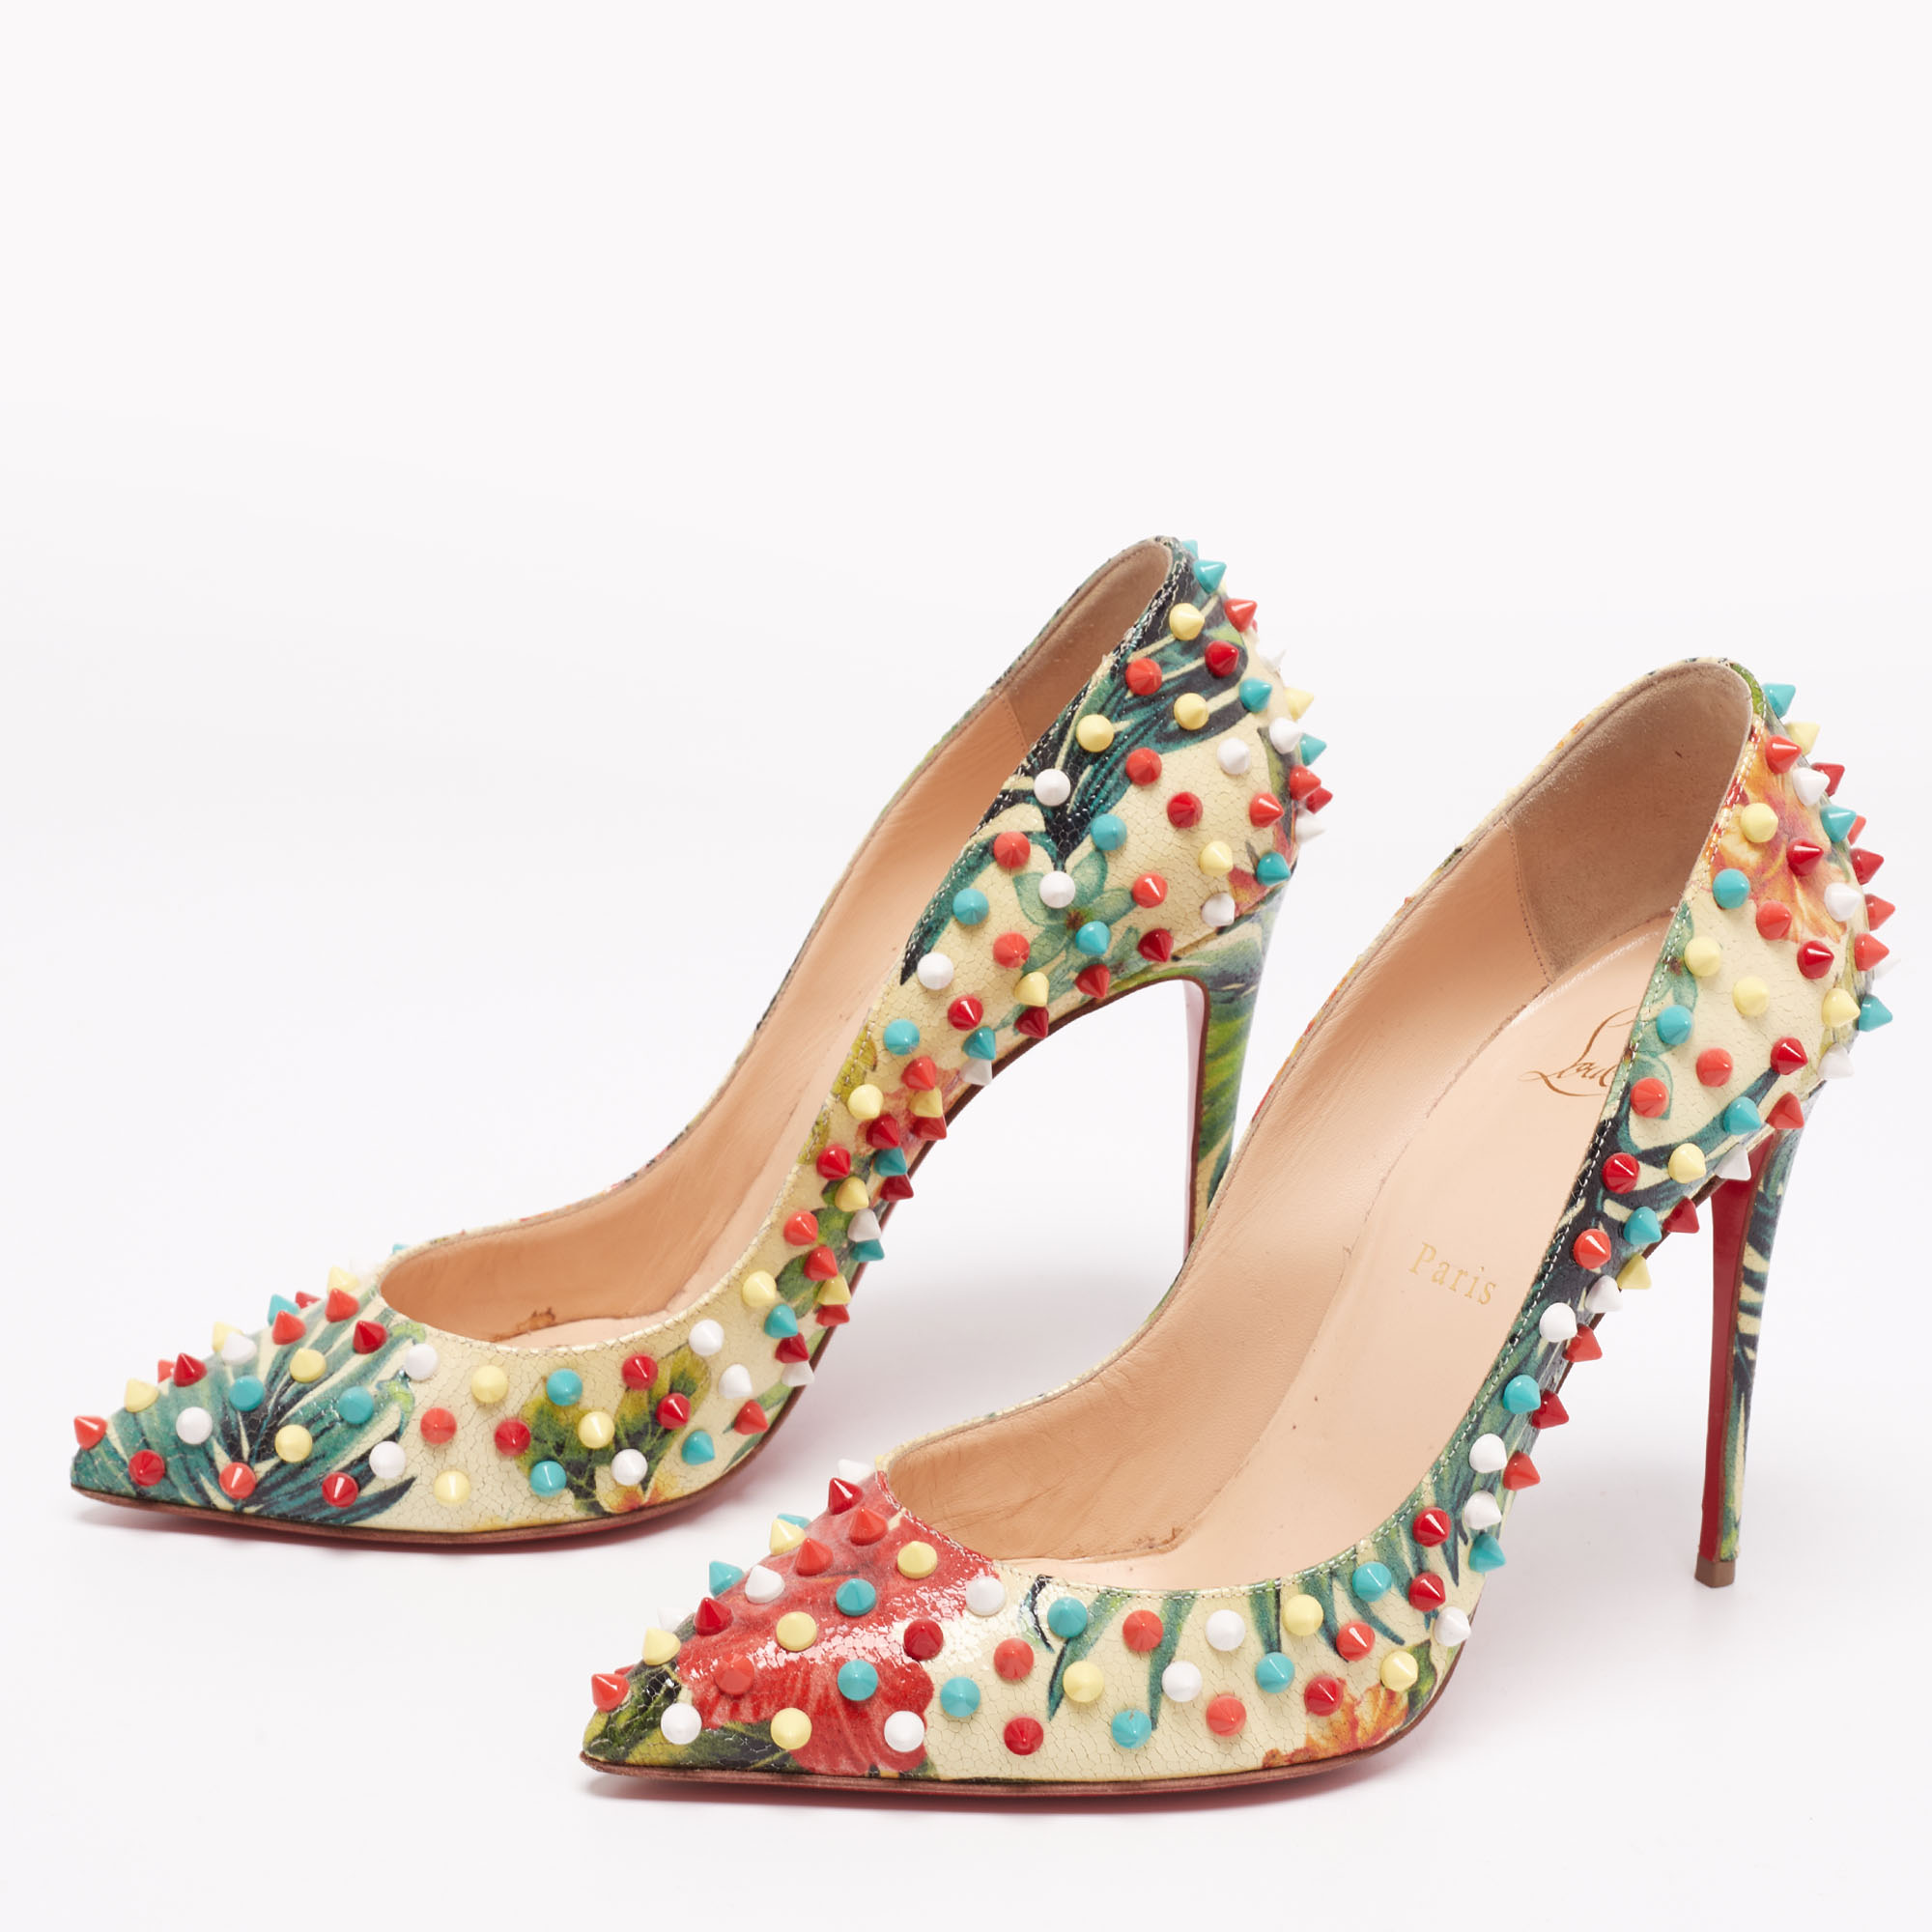 

Christian Louboutin Multicolor Floral Crackled Leather Hawaiian Follies Spike Pumps Size